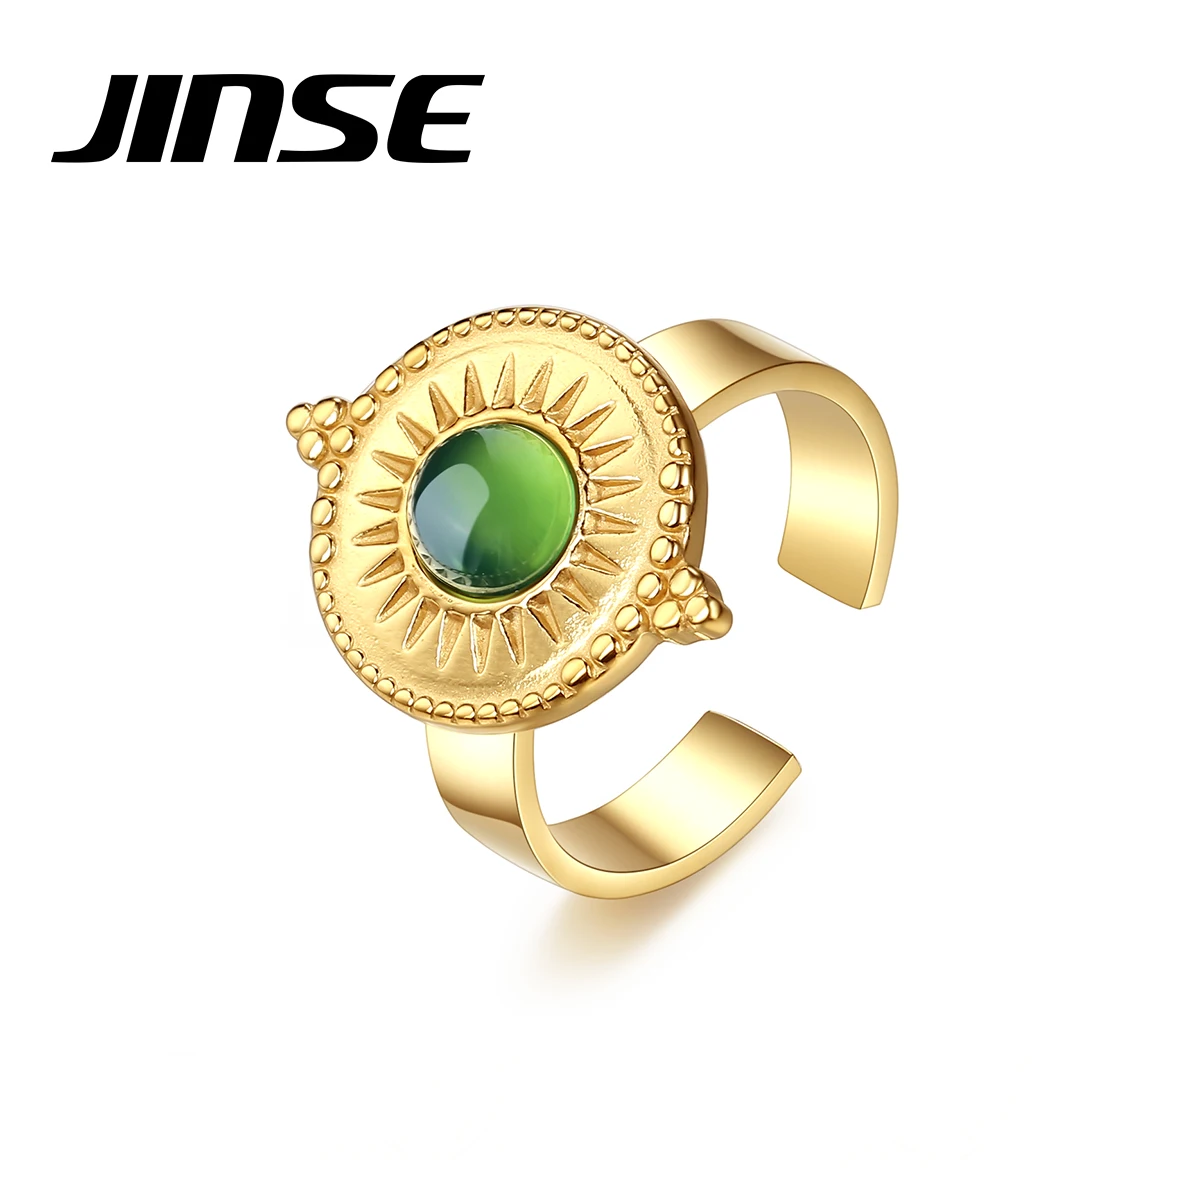 

Jinse New Adjustable Turquoise Ring for Women Fashion Jewelry Anniversary Gold Color Stainless Steel Sun Bague Femme Bijoux Gift